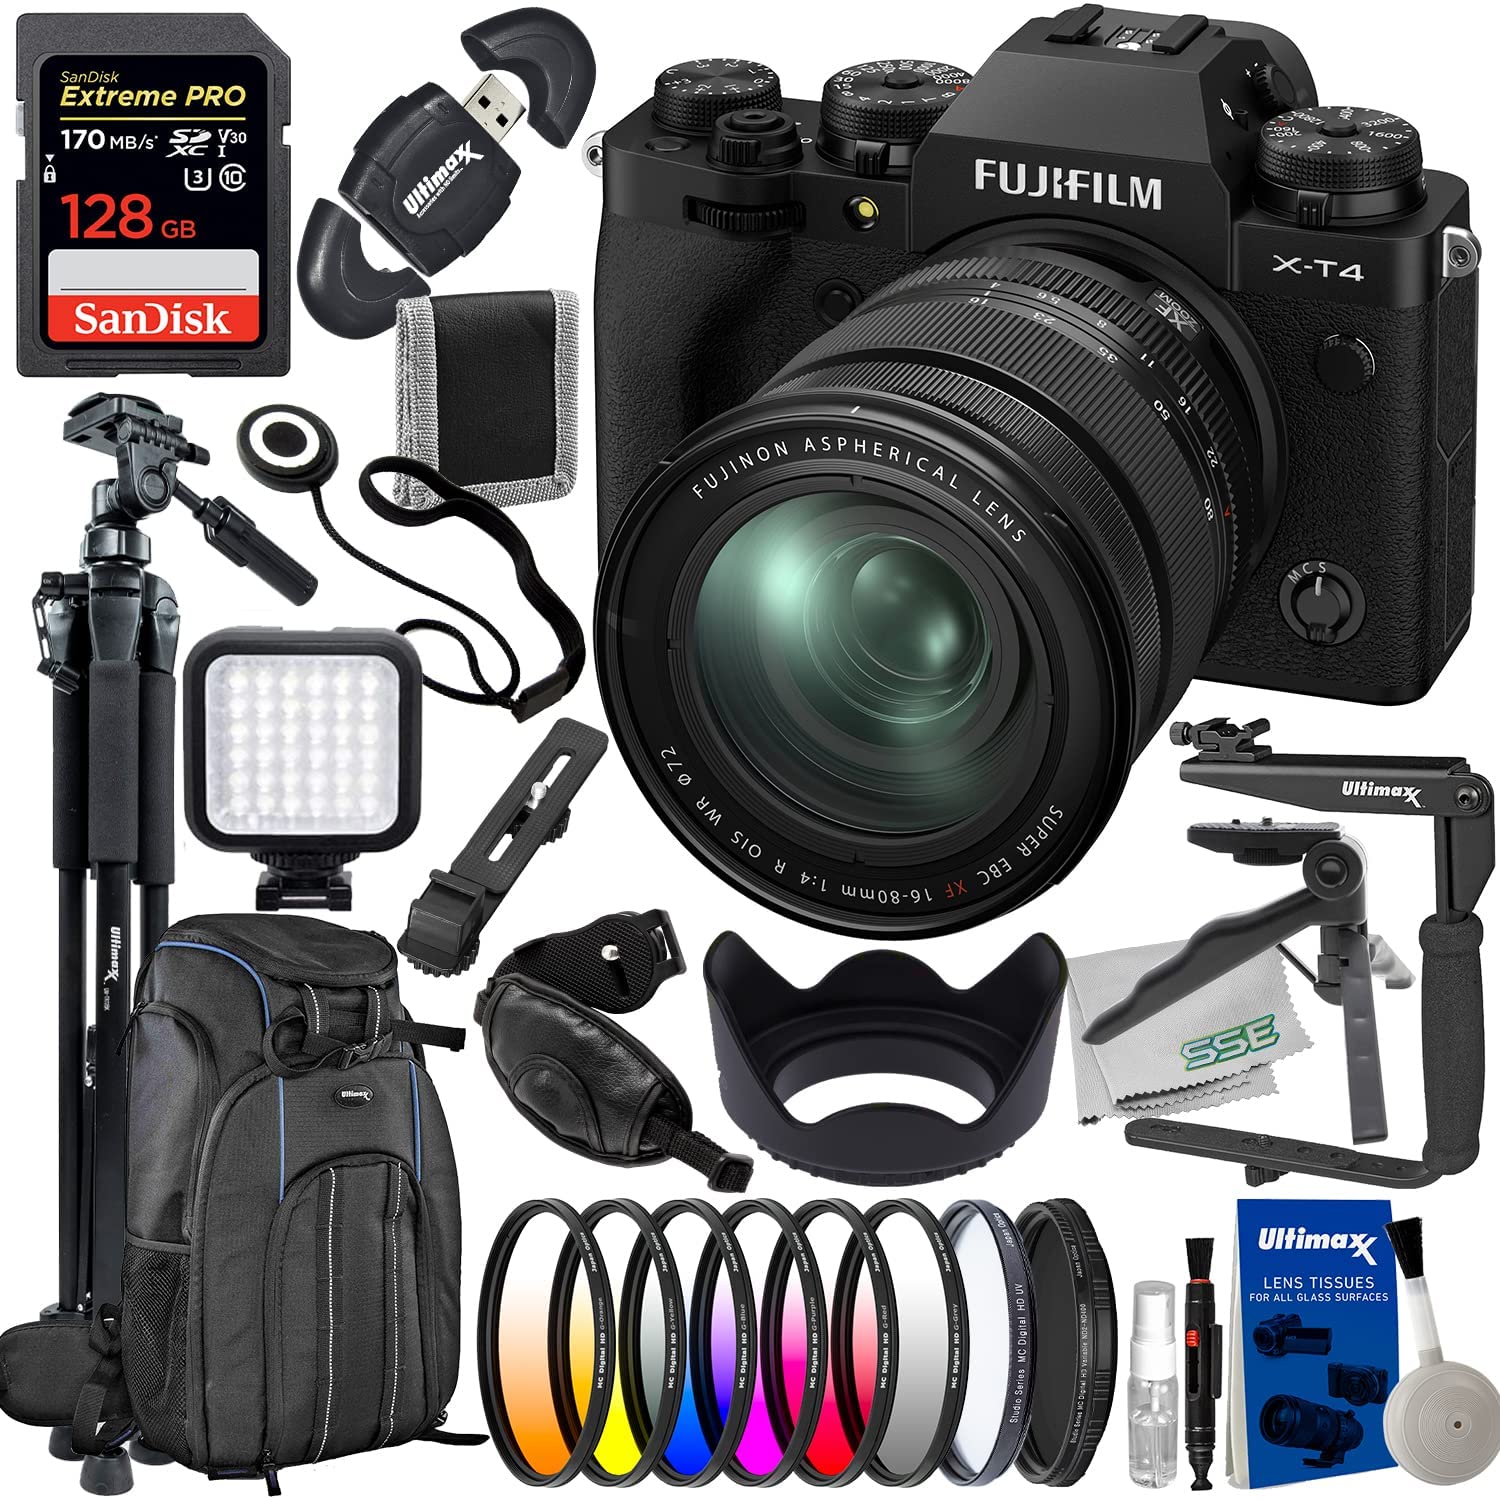 FUJIFILM X-T4 Mirrorless Camera with 16-80mm Lens (Black) + SanDisk 128GB Extreme Pro SDXC, Deluxe Camera Backpack, Lightweight 72â? Tripod, LED Video Light & Much More (36pc Bundle)